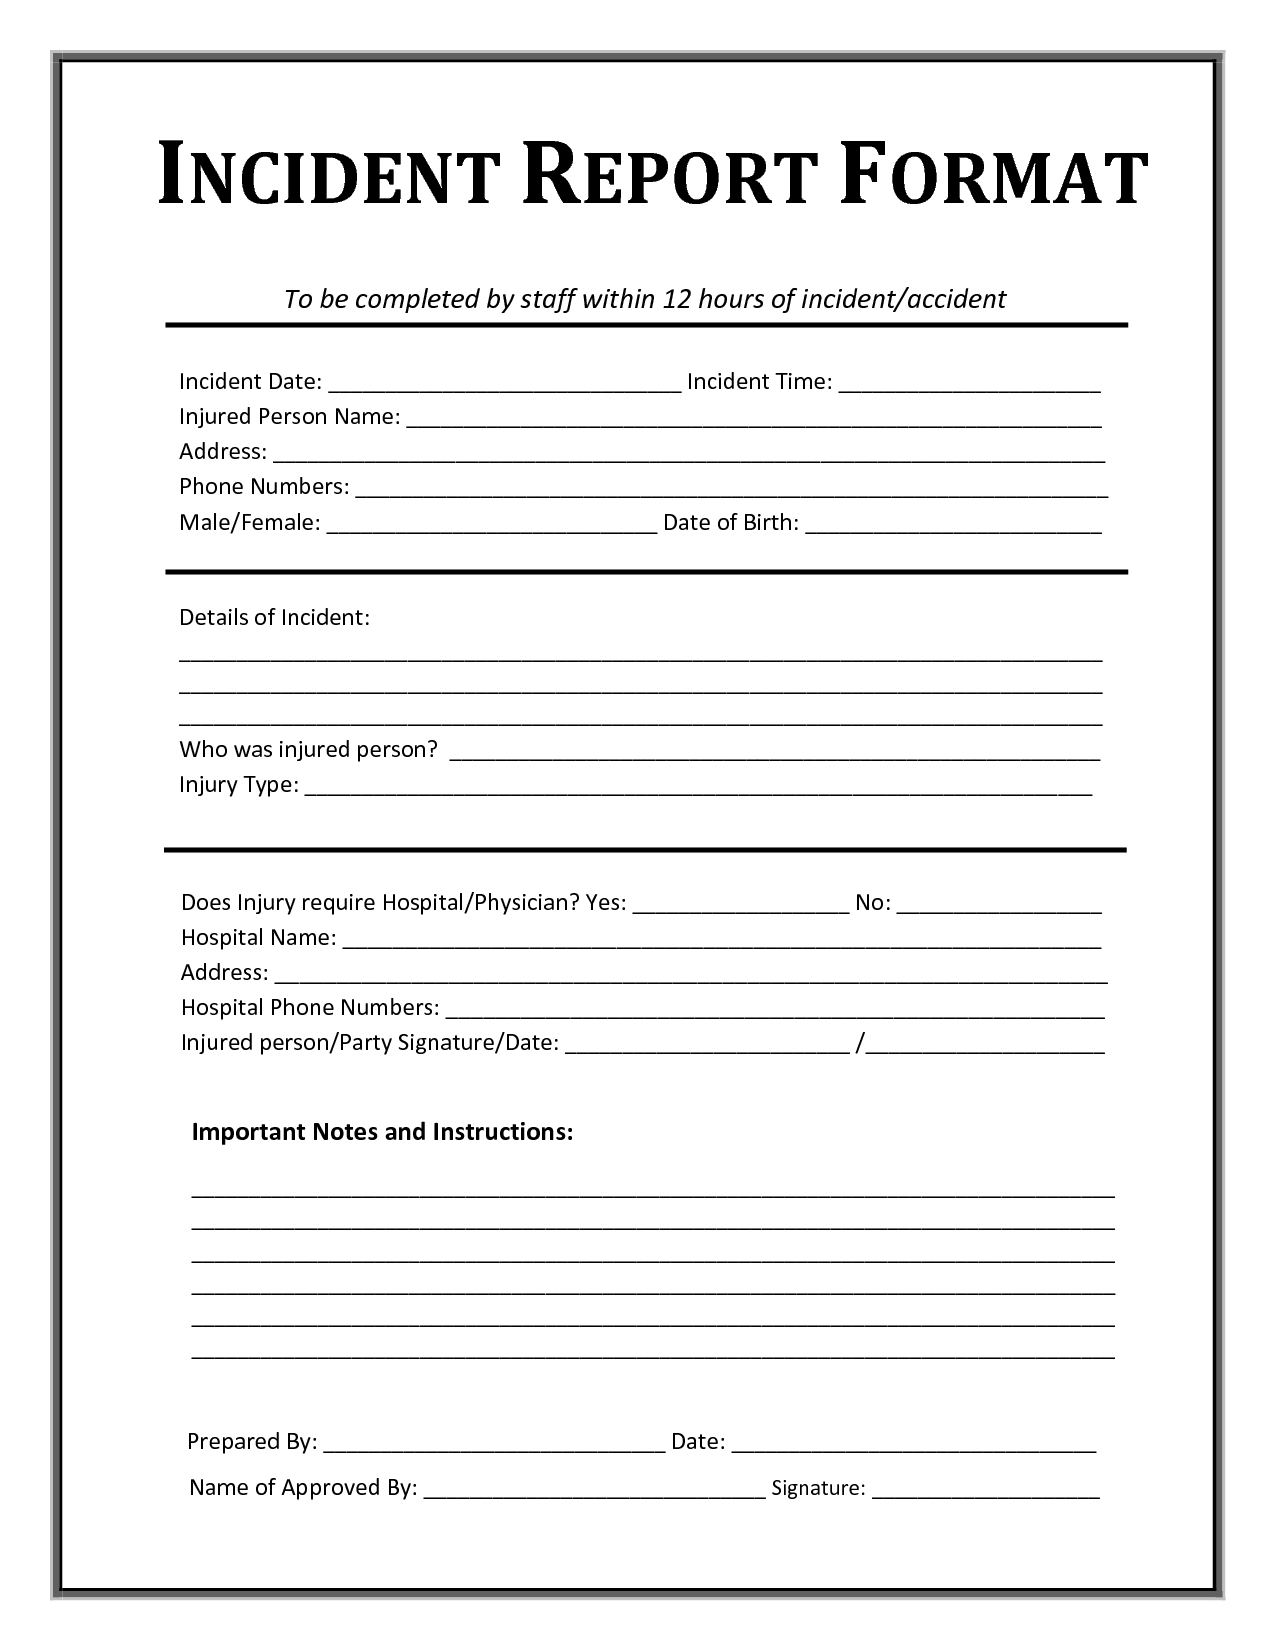 Free Printable Incident Report Format And Template For Throughout Employee Incident Report Templates